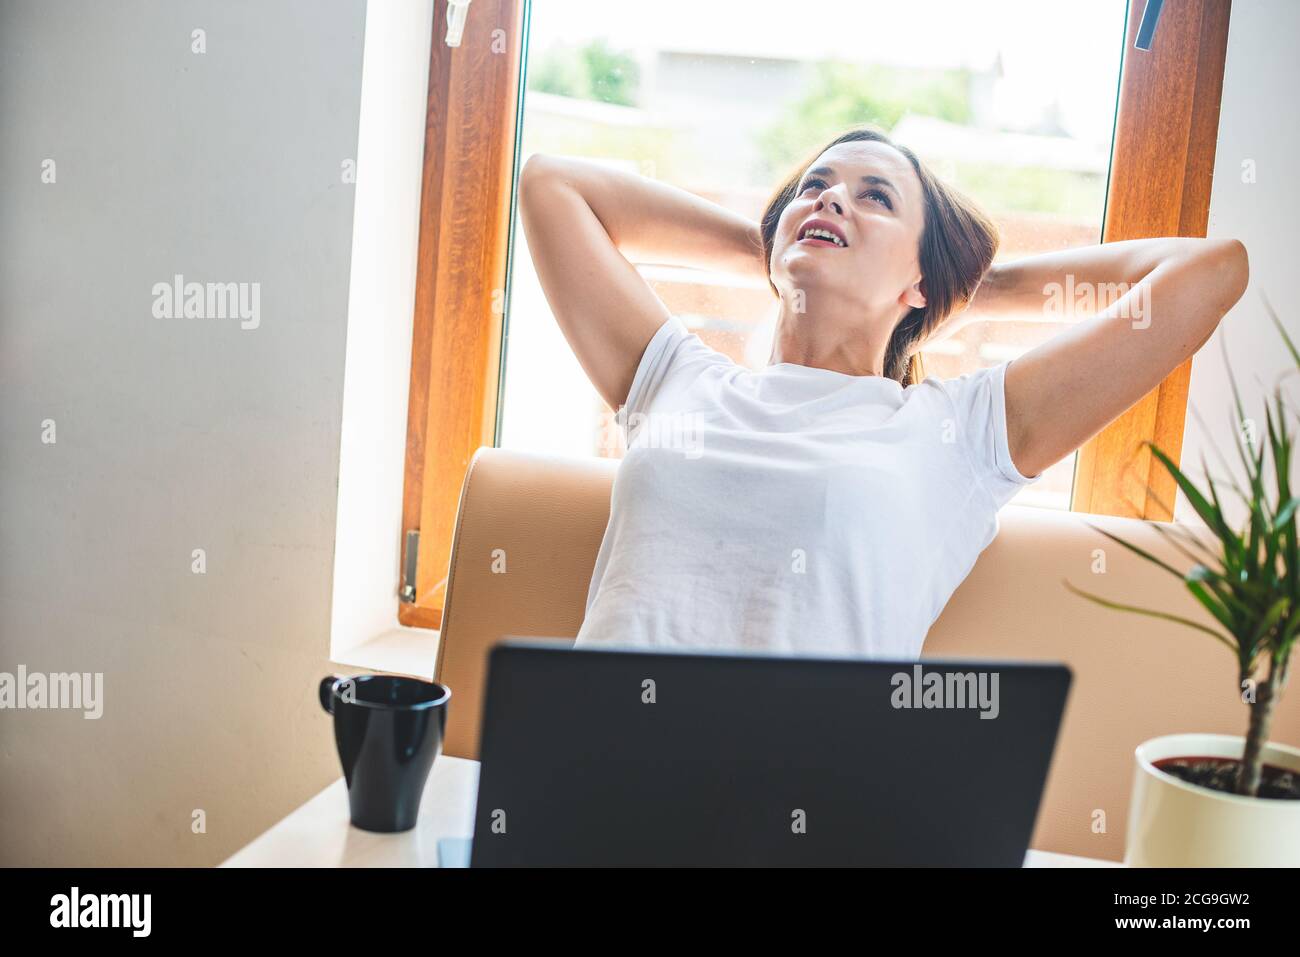 Calm smilin woman relaxing with  hands behind head, happy woman resting  satisfied after work done, enjoying break with eyes closed, peace of mind, no Stock Photo